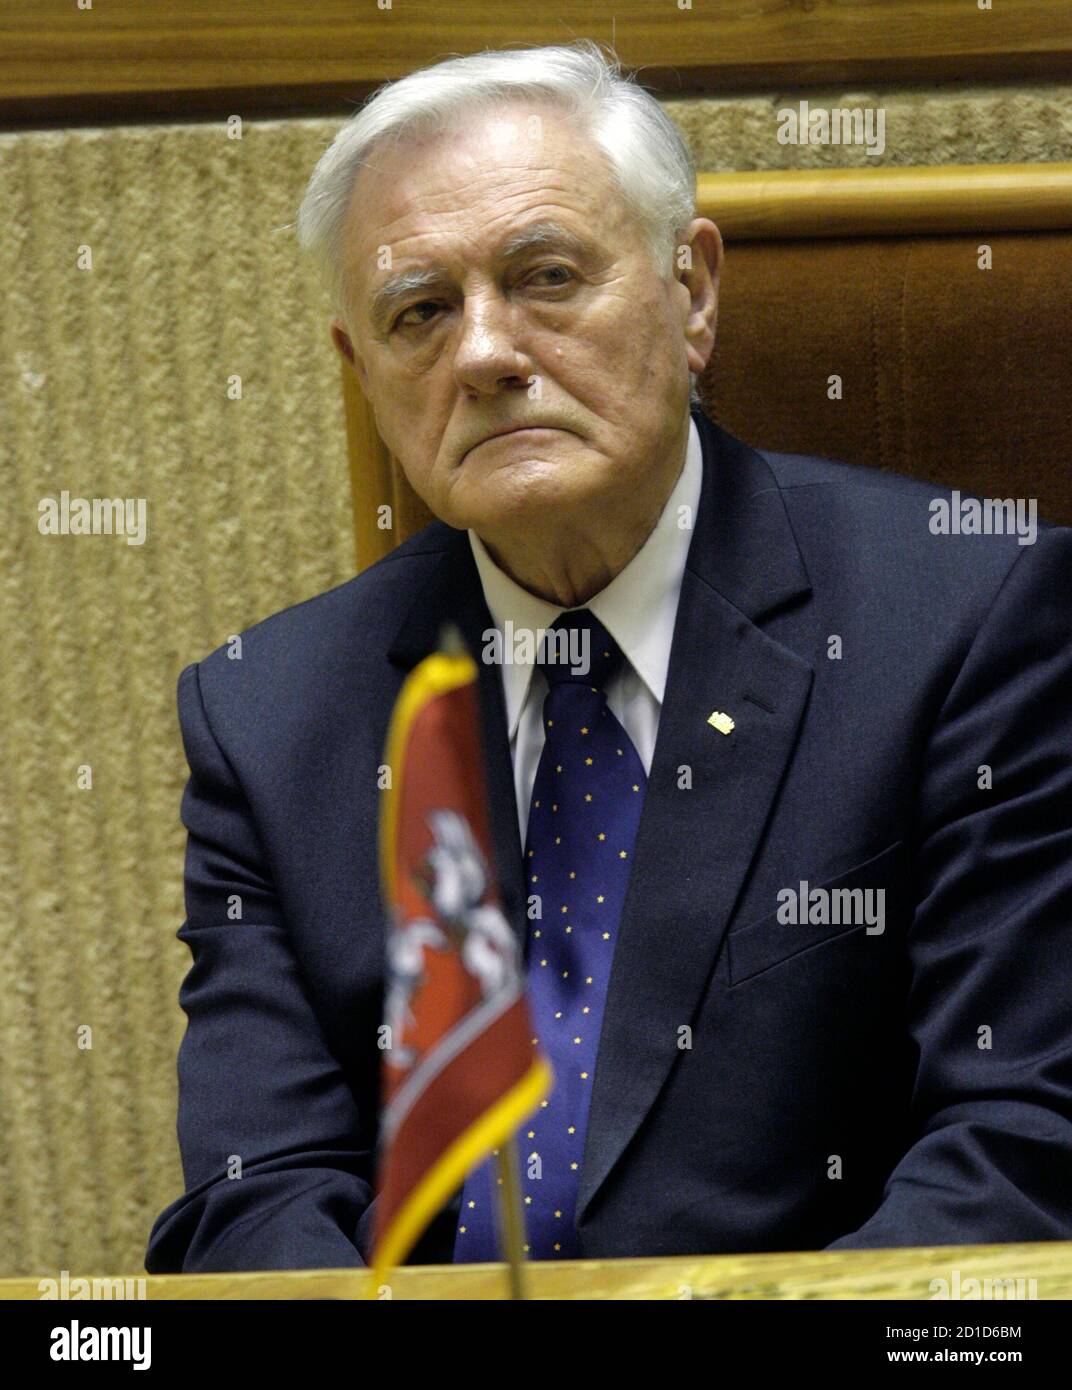 Lithuania's President Valdas Adamkus listens during the first session of a new parliament (Seimas) in Vilnius November 17, 2008. REUTERS/Ints Kalnins (LITHUANIA) Stock Photo